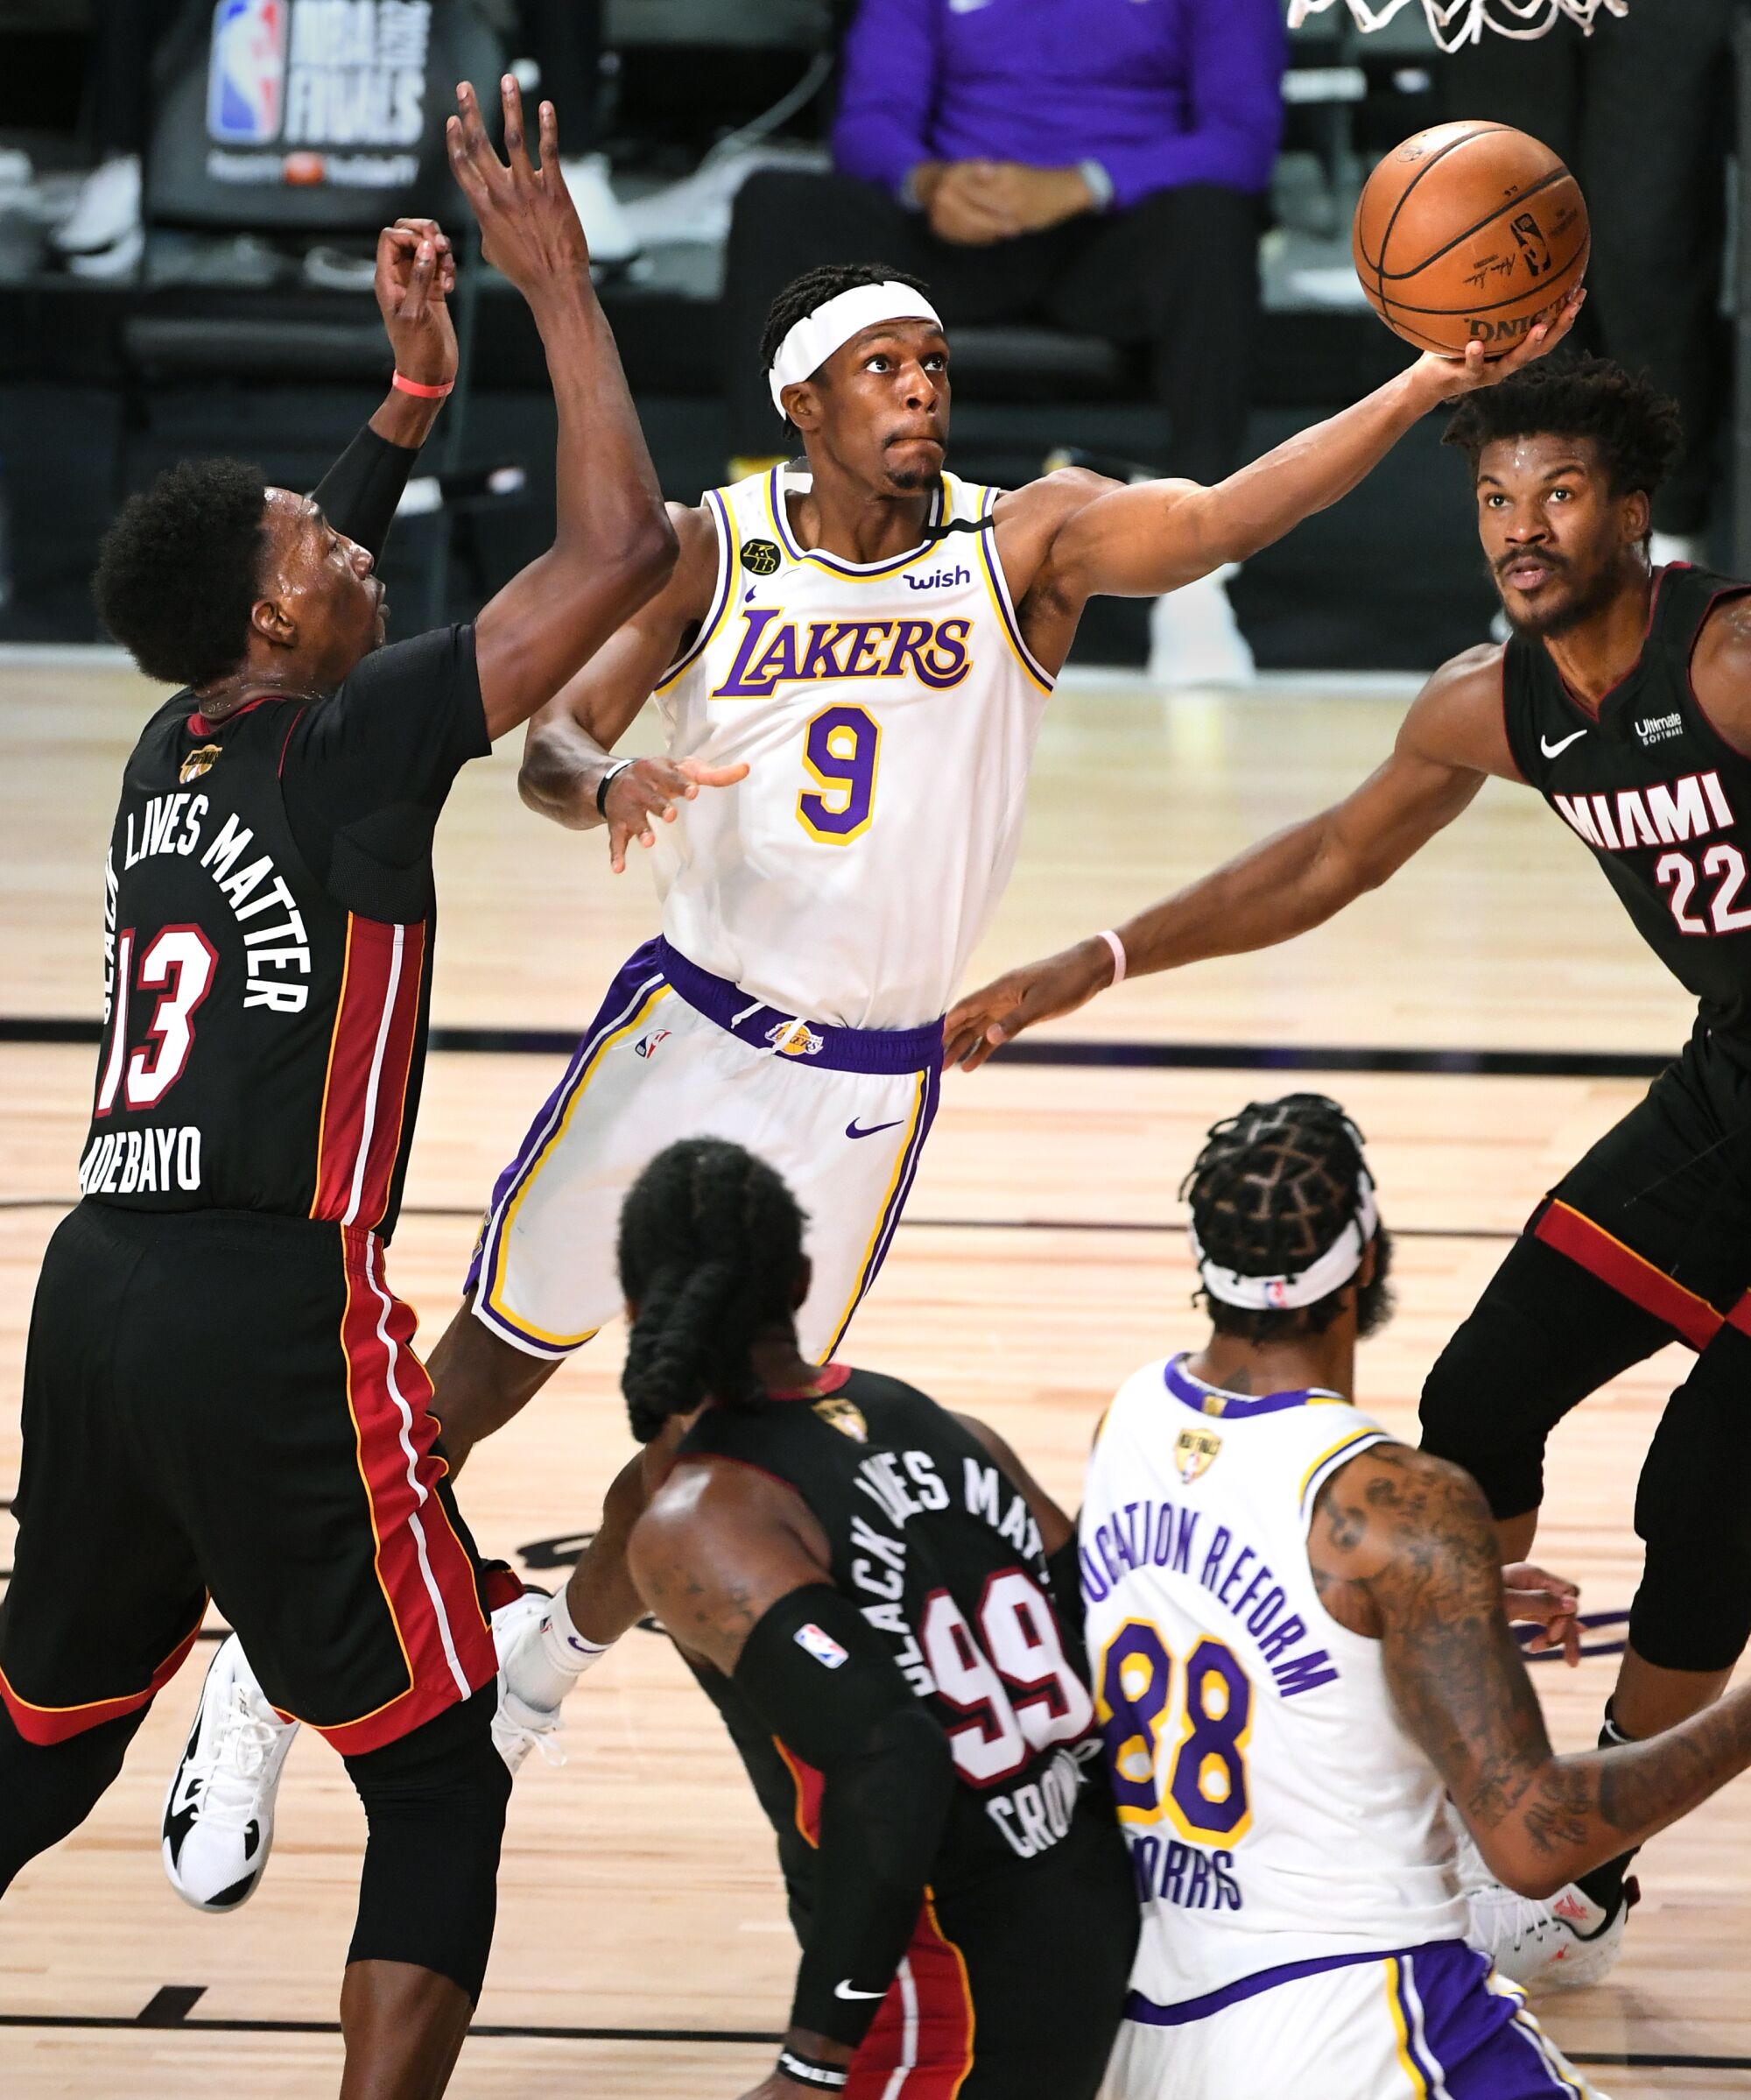 Lakers guard Rajon Rondo scores in front of Miami Heat forwards Bam Adebayo and Jimmy Butler.